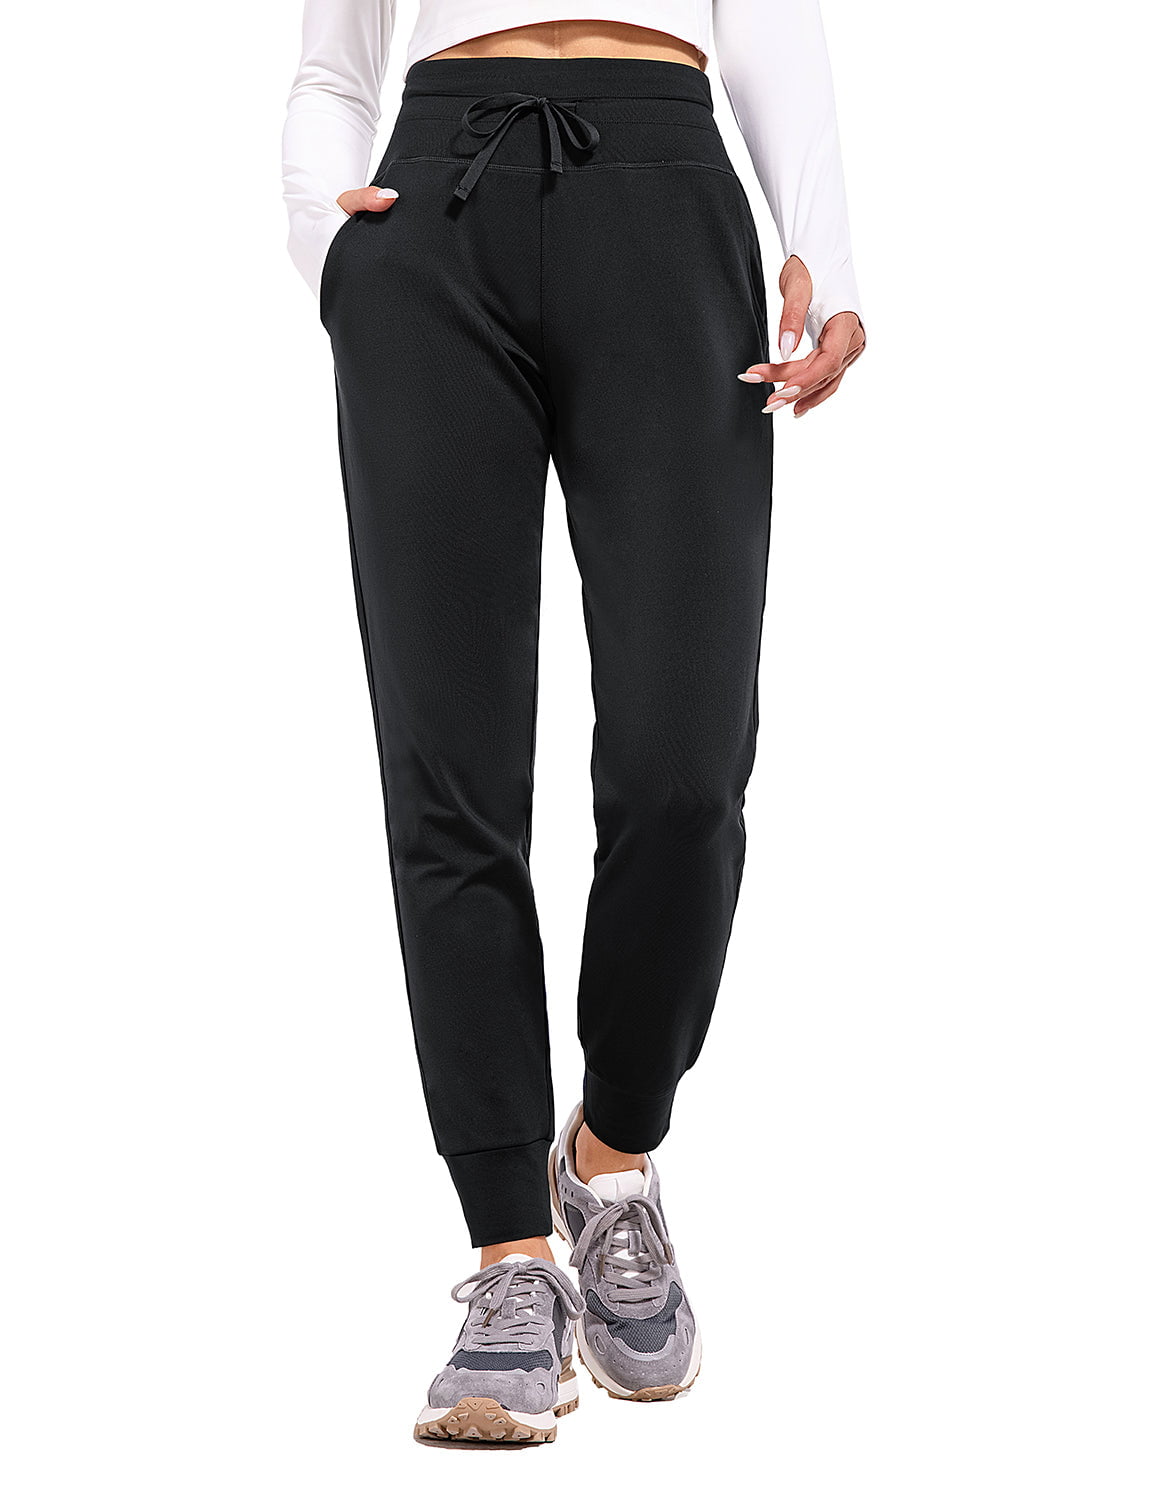 Thermal Pockets Women\'s XS Hiking Waisted Resistant Lined Pants Sweatpants Winter Joggers Water BALEAF Black High Running Fleece